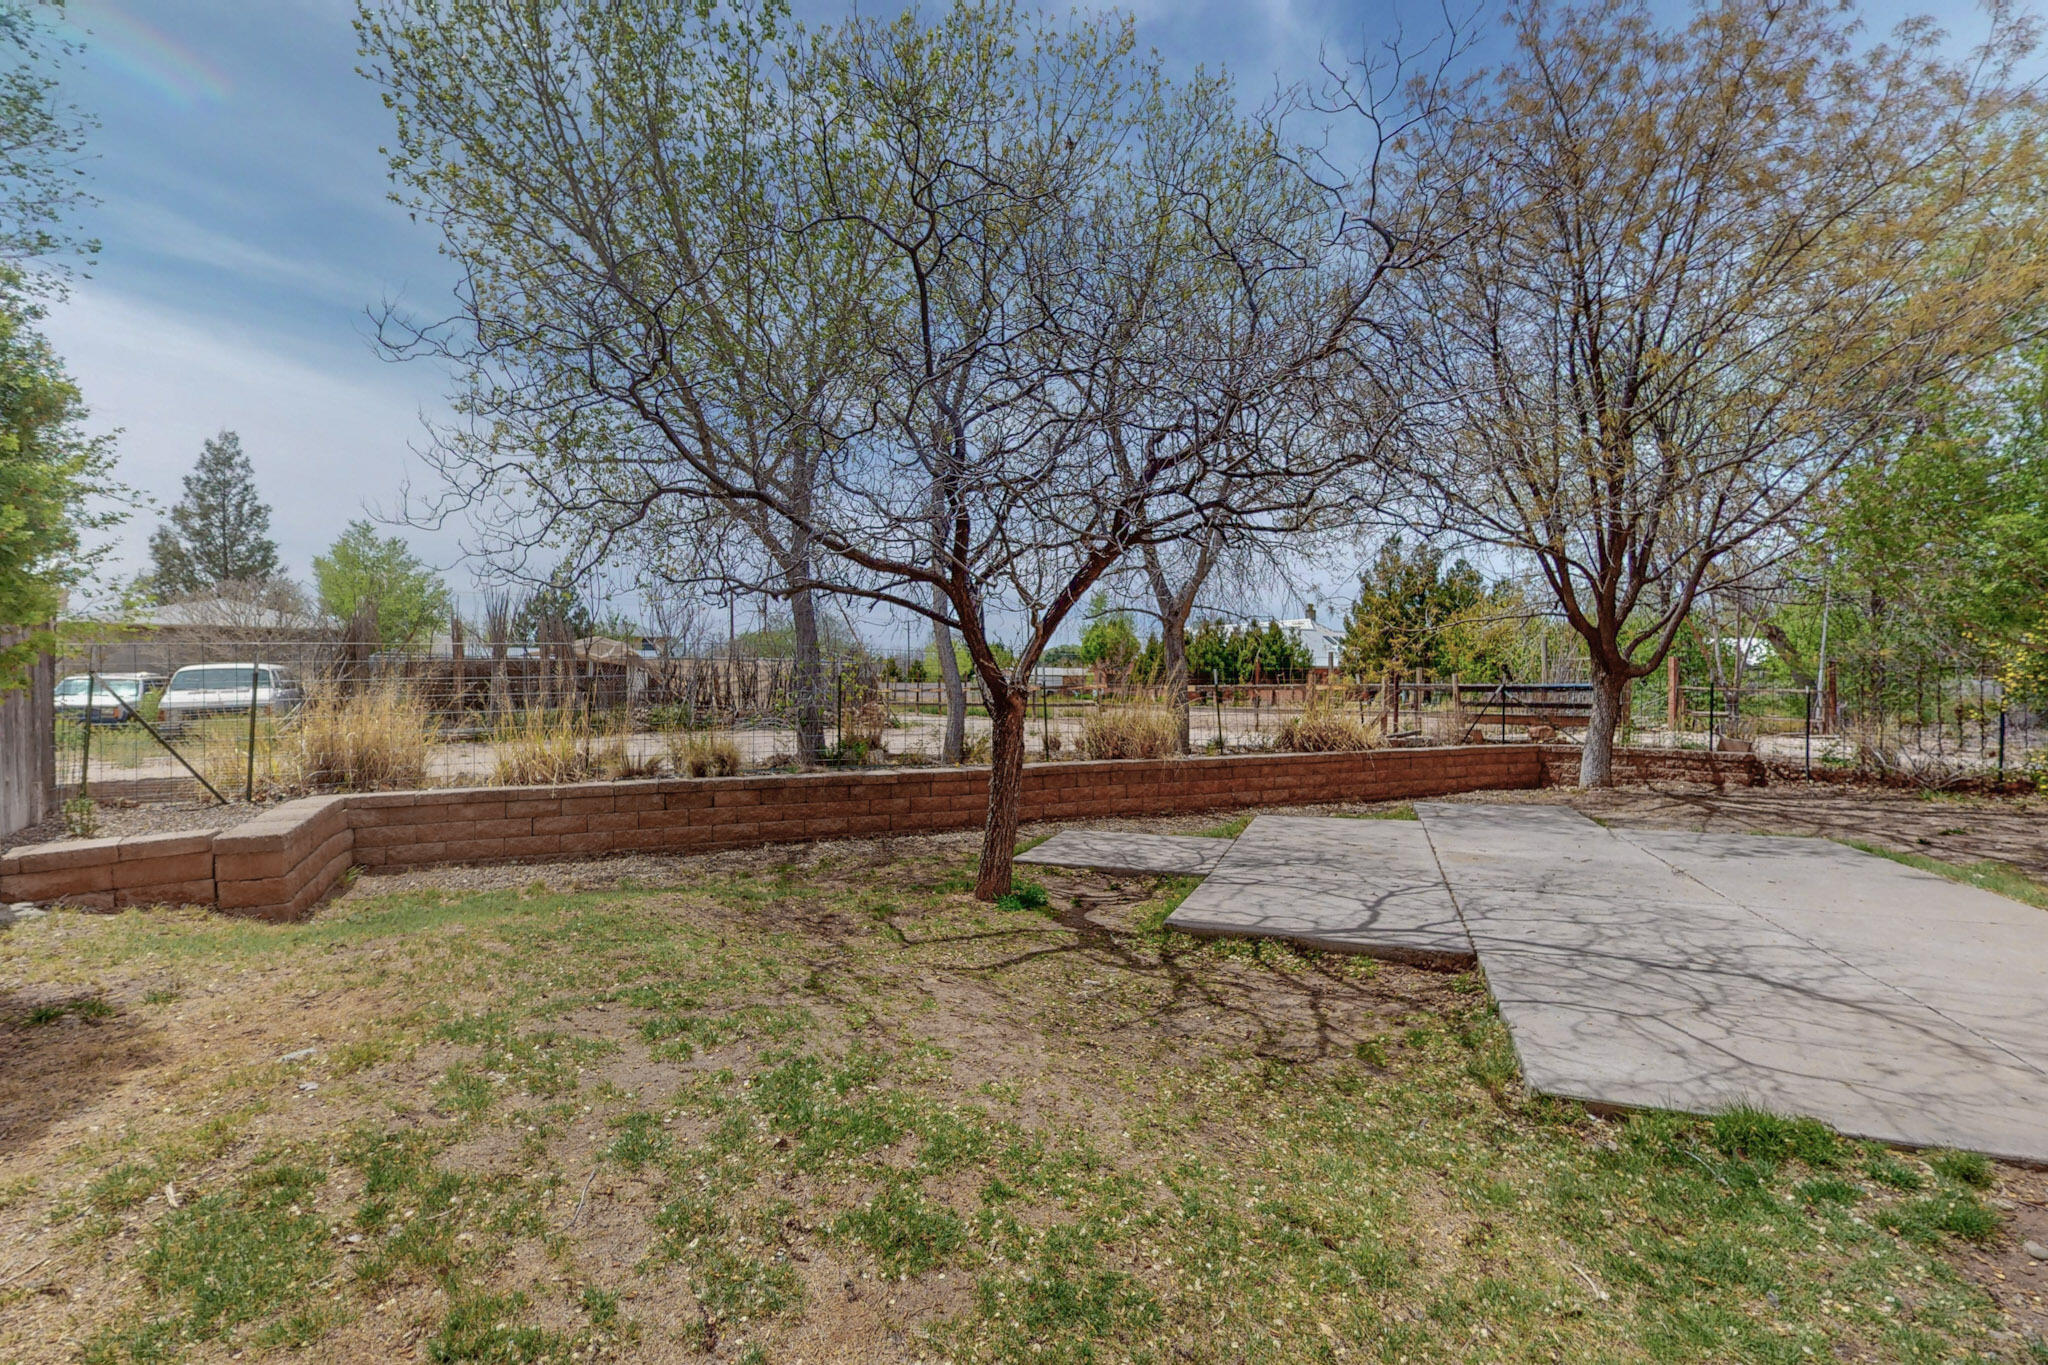 2928 Floral Road NW, Albuquerque, New Mexico 87104, 3 Bedrooms Bedrooms, ,2 BathroomsBathrooms,Residential,For Sale,2928 Floral Road NW,1061080